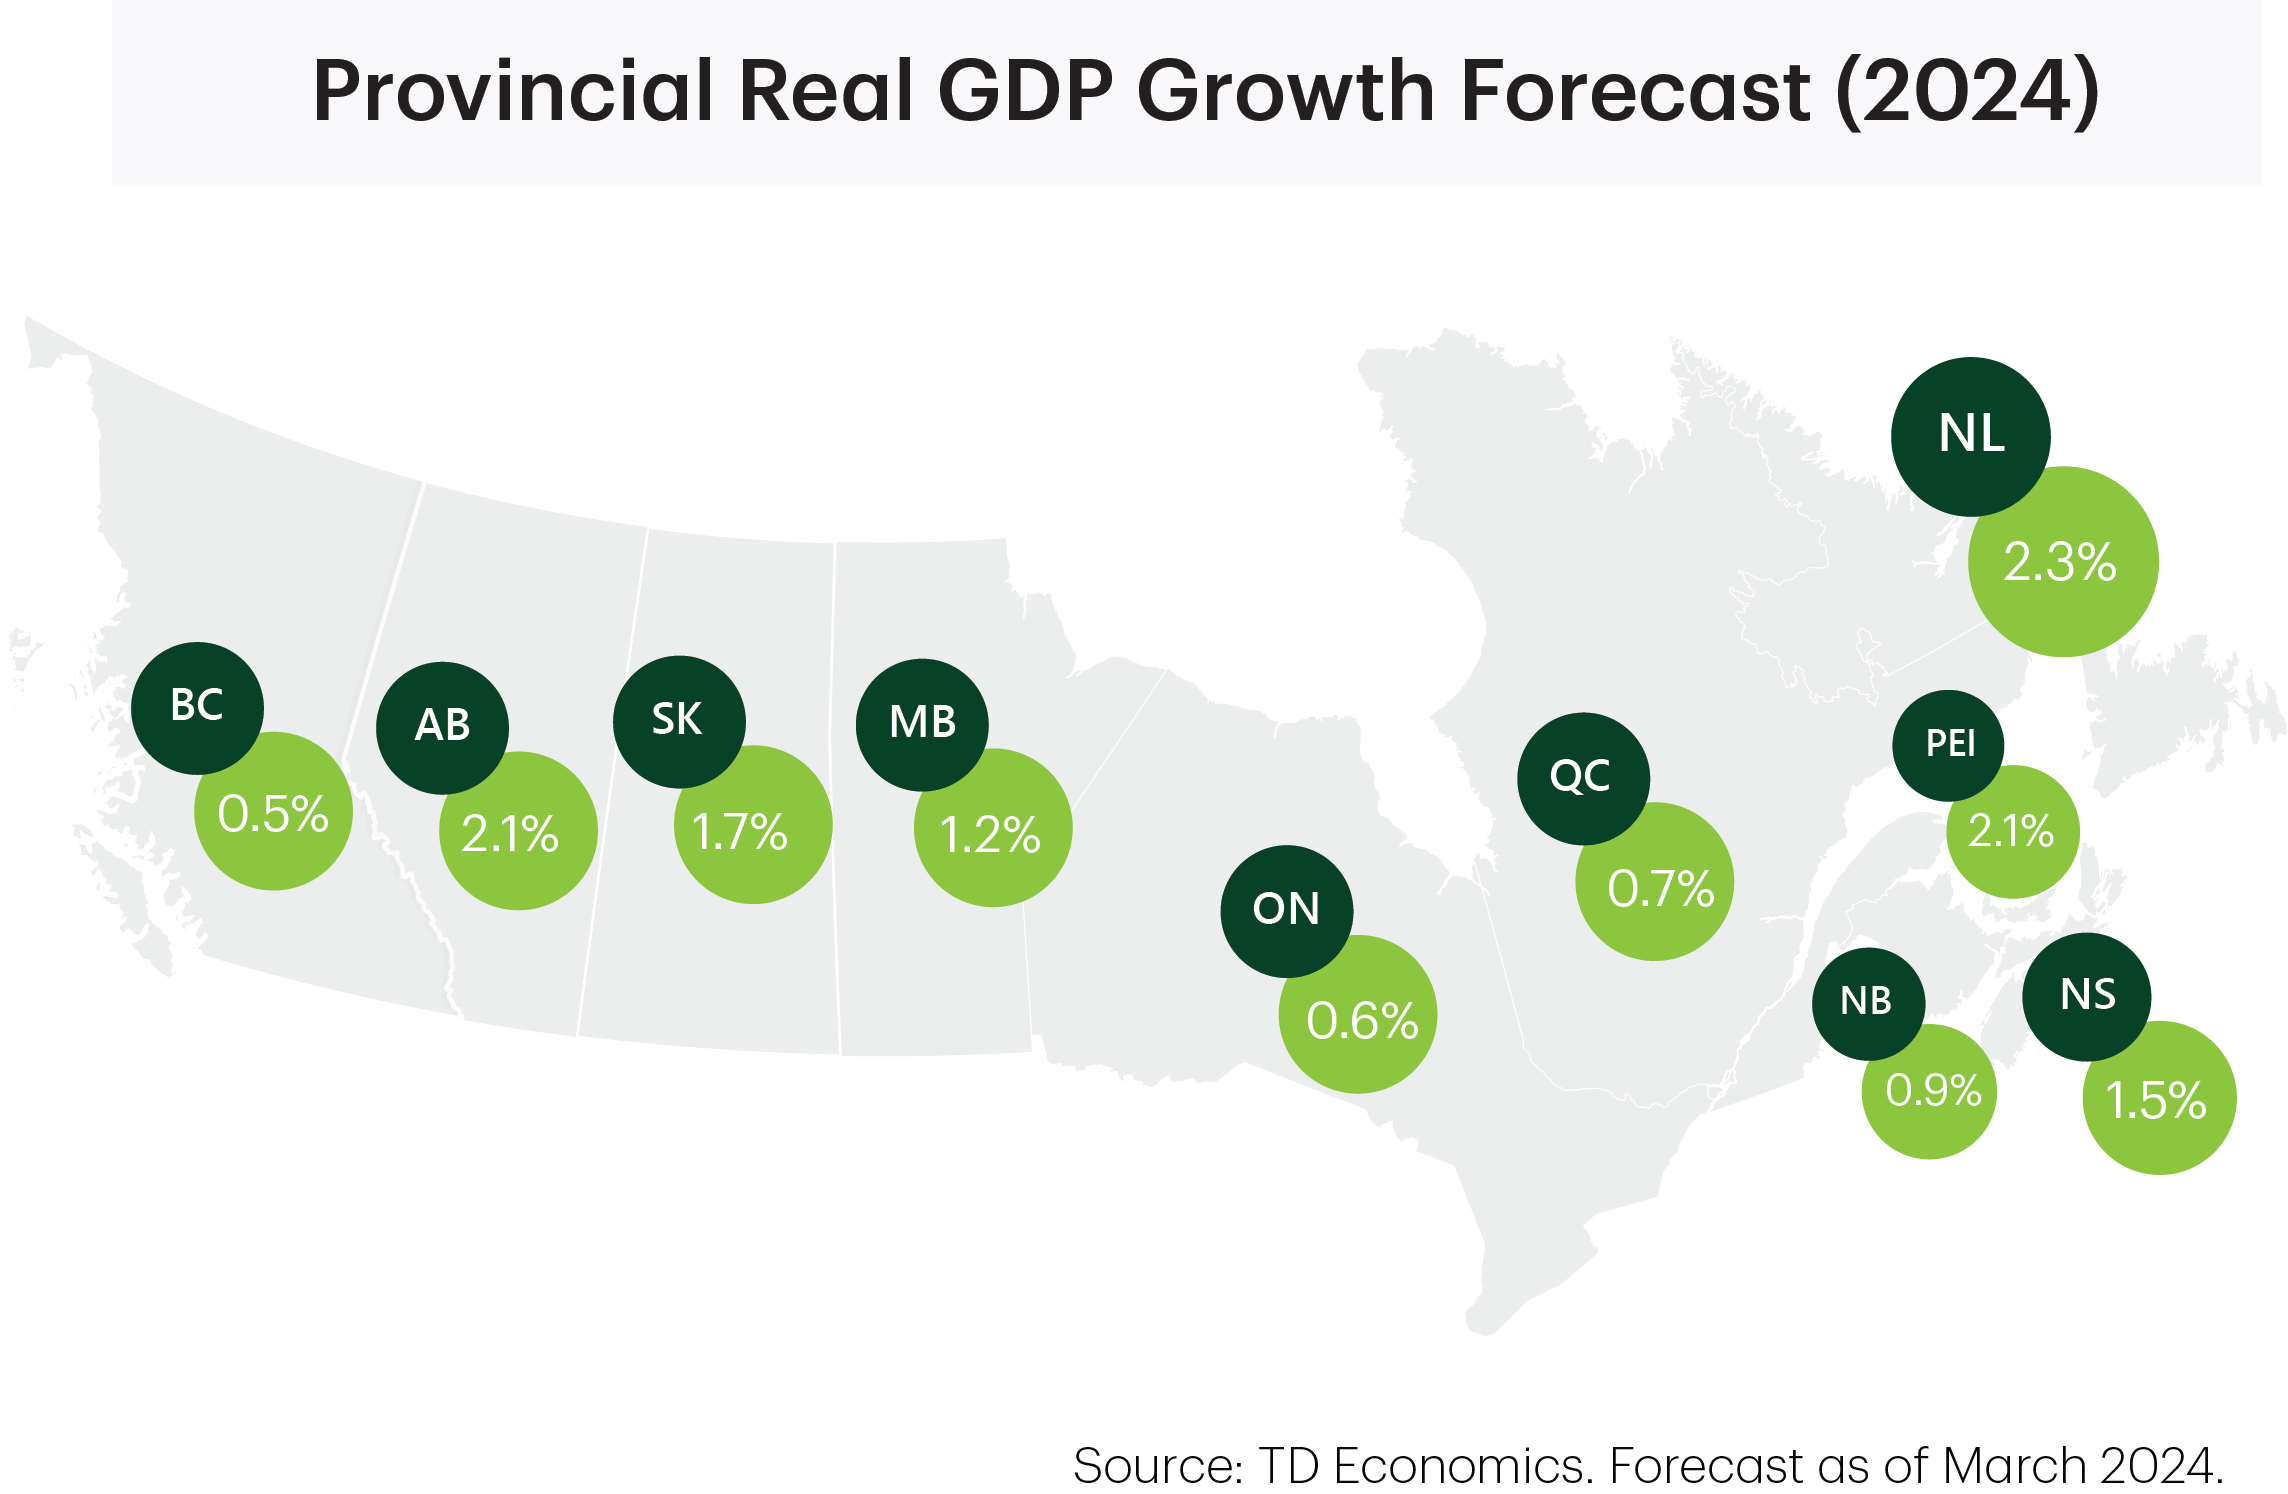 Provincial Real GDP Growth Forecast (2024)
        BC: 0.5%
        AB: 2.1%
        SK: 1.7%
        MB: 1.2%
        ON: 0.6%
        QC: 0.7%
        NB: 0.9%
        NS: 1.5%
        PEI: 2.1%
        NL: 2.3%
        